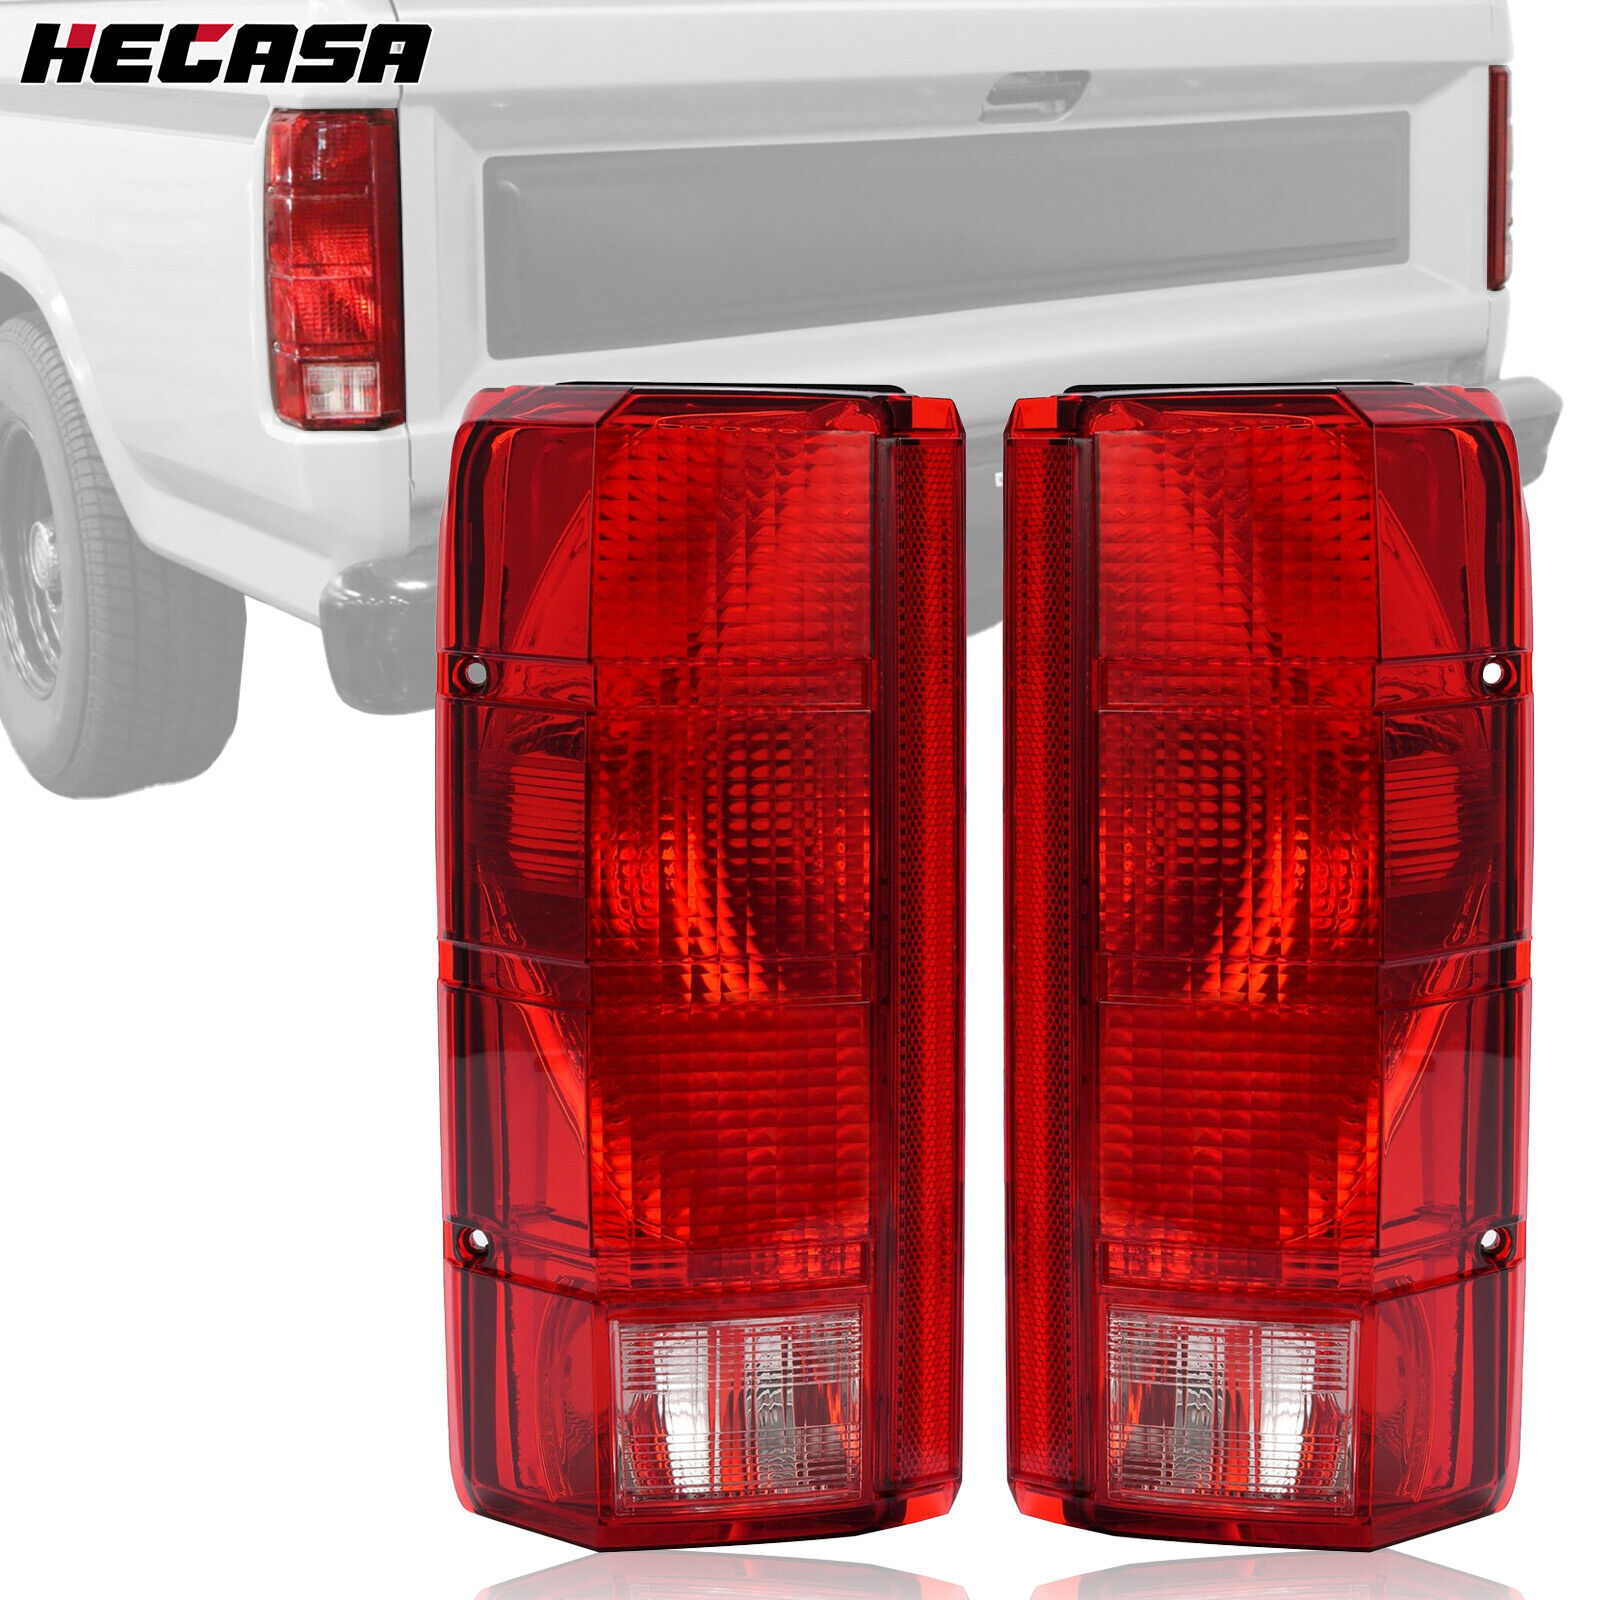 HECASA Tail Lights For Ford F-150/F-250/F-350/Bronco 1980-1986 F-100 1980-1983